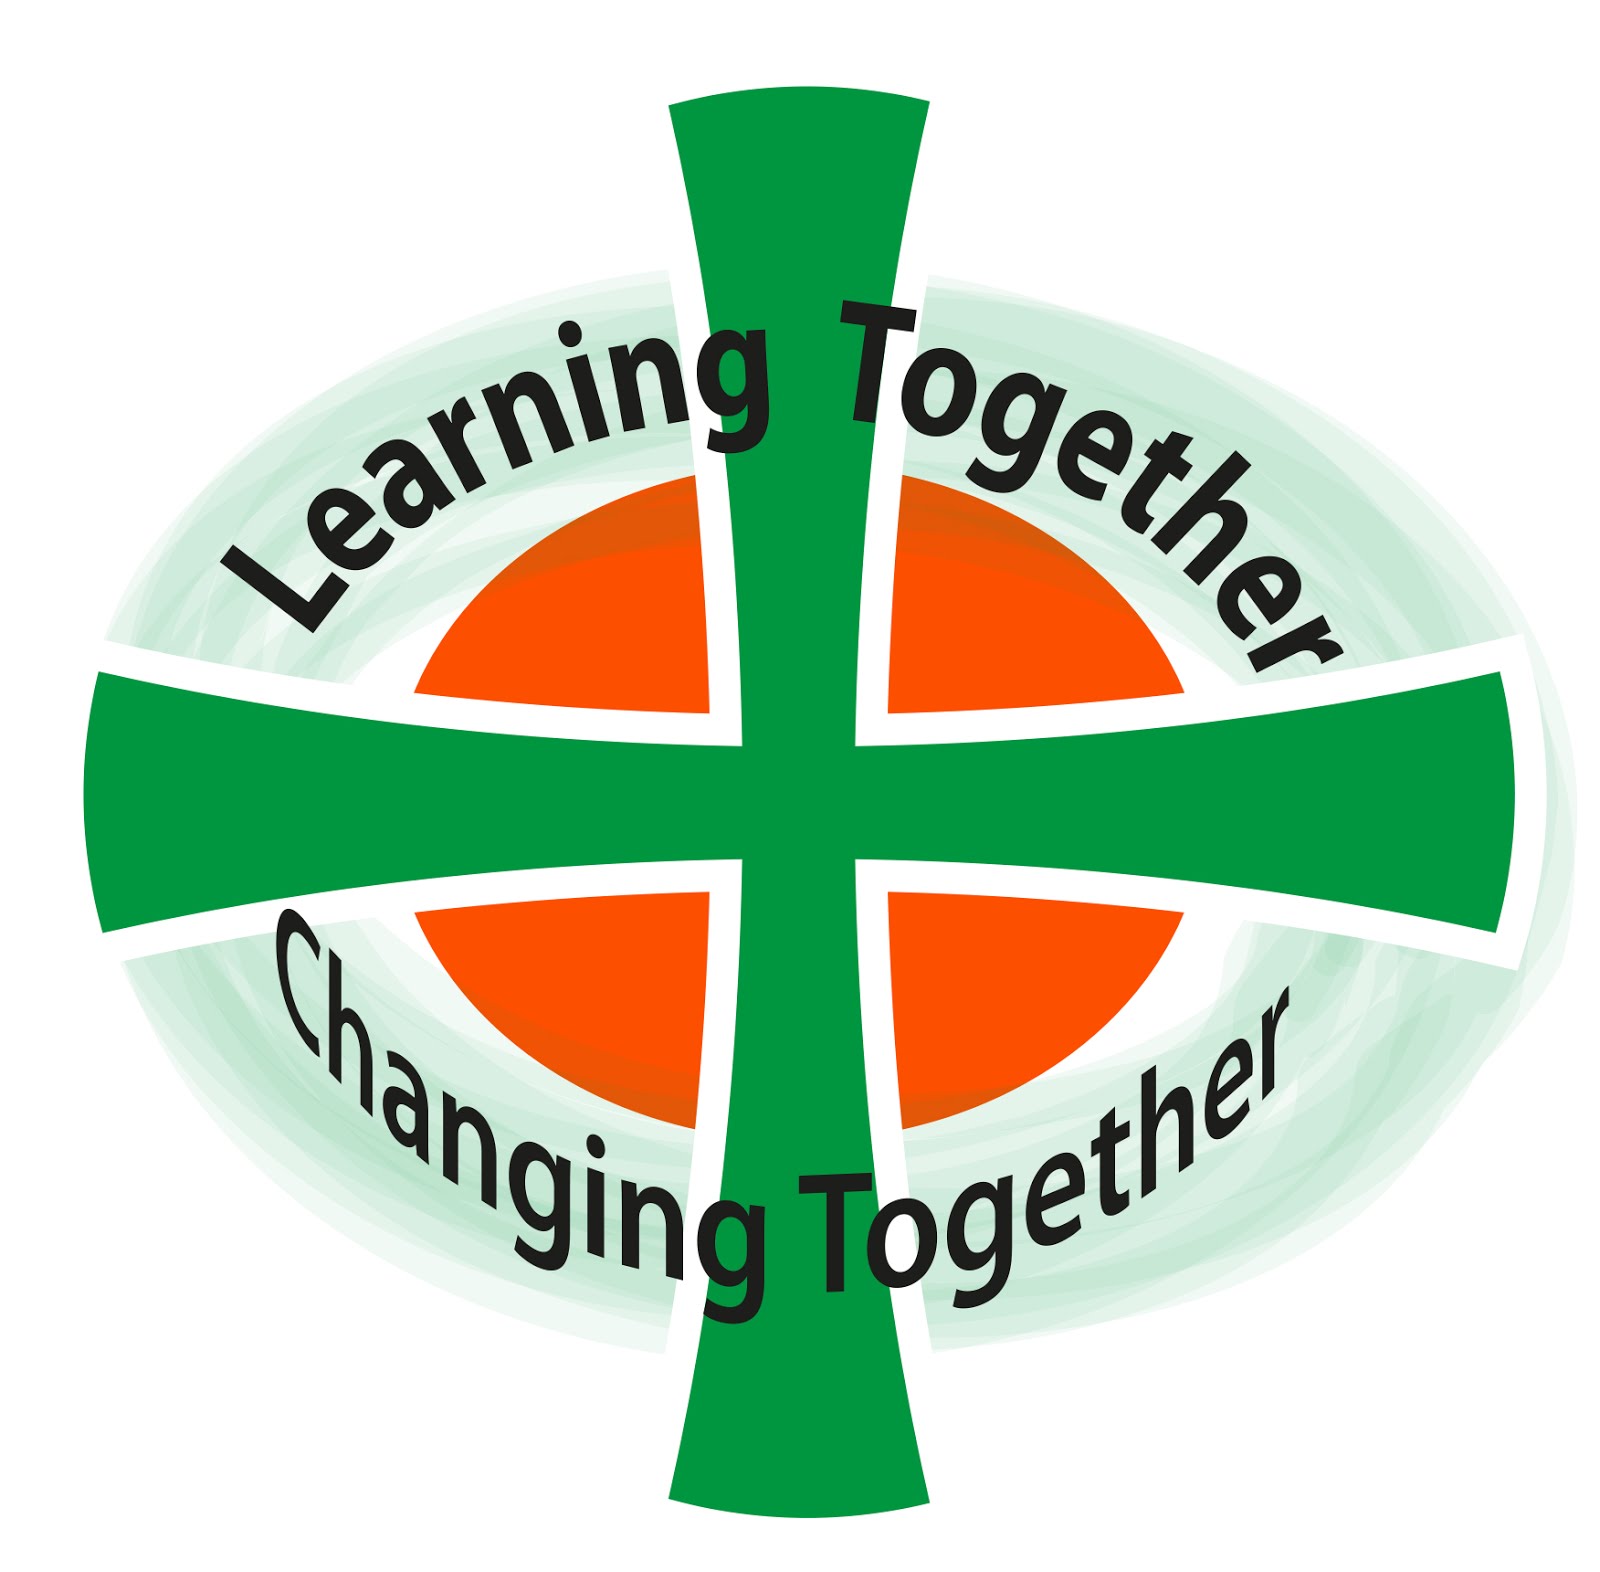 Learning together, Changing together